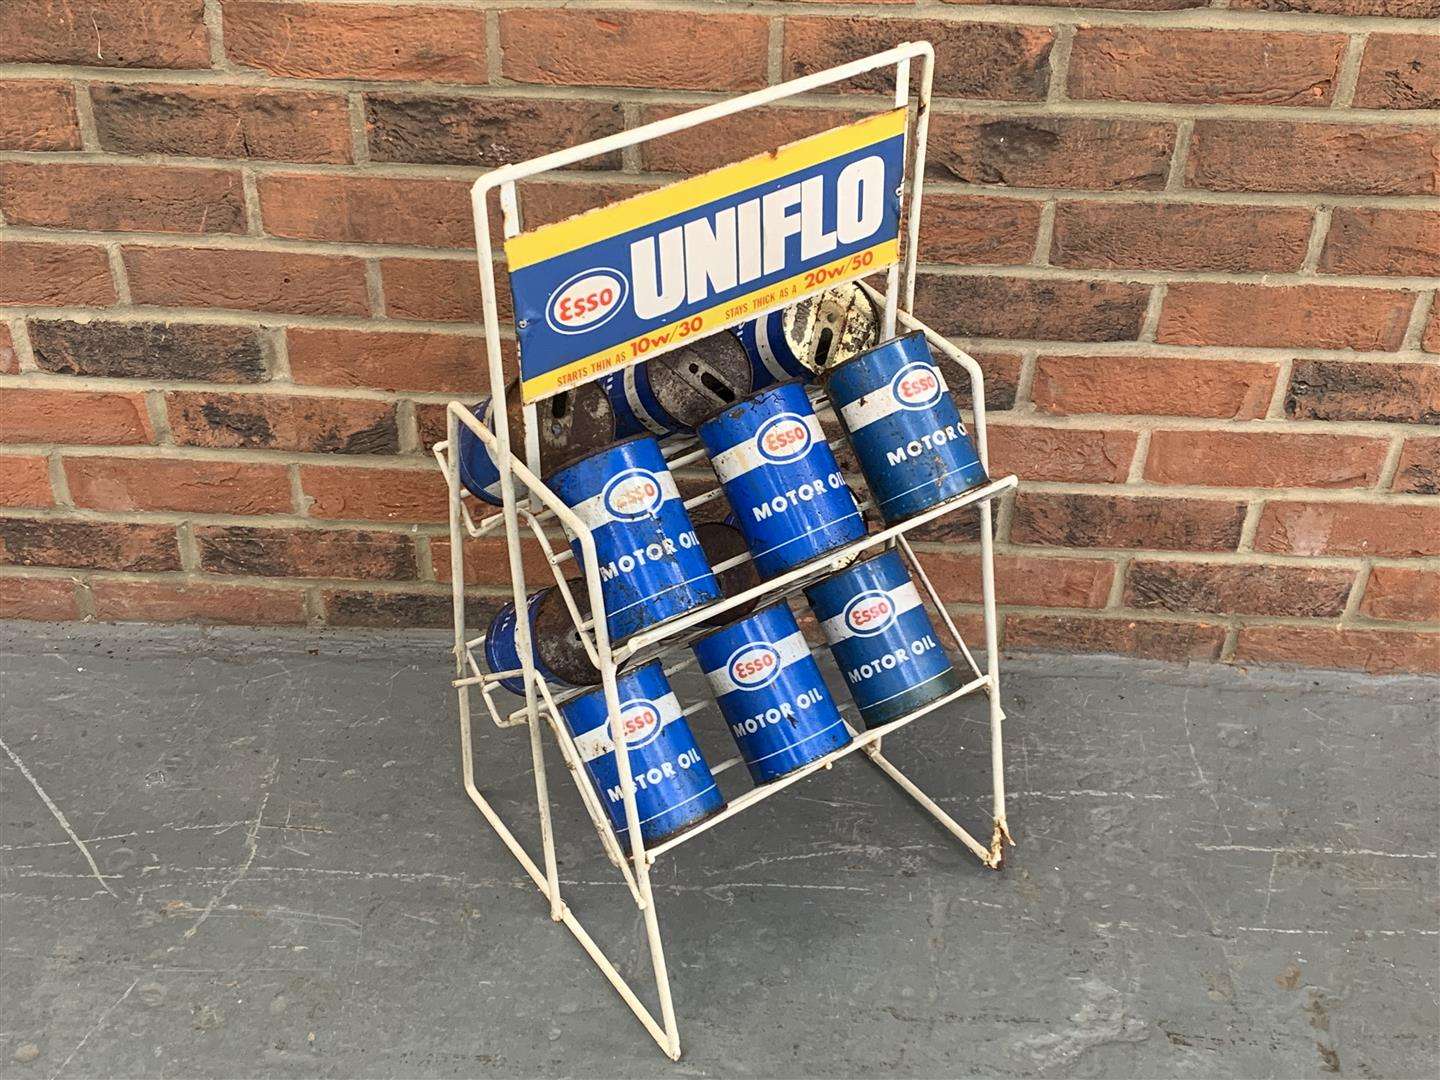 <p>Esso Uniflo Motor Oils Display Stand &amp; Cans</p>